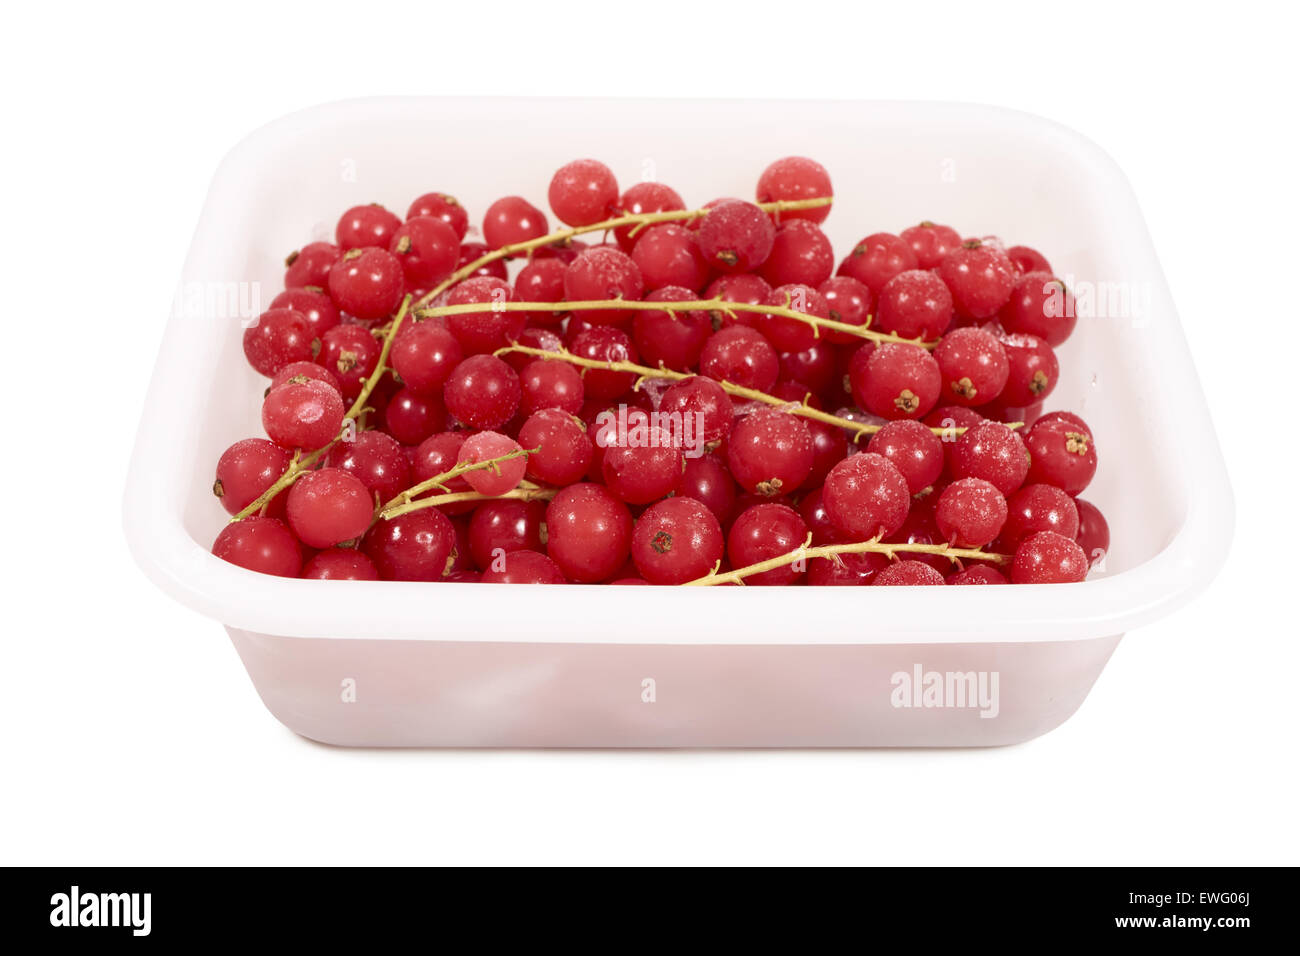 Frozen currants with stems in a white plastic box on a white background Stock Photo